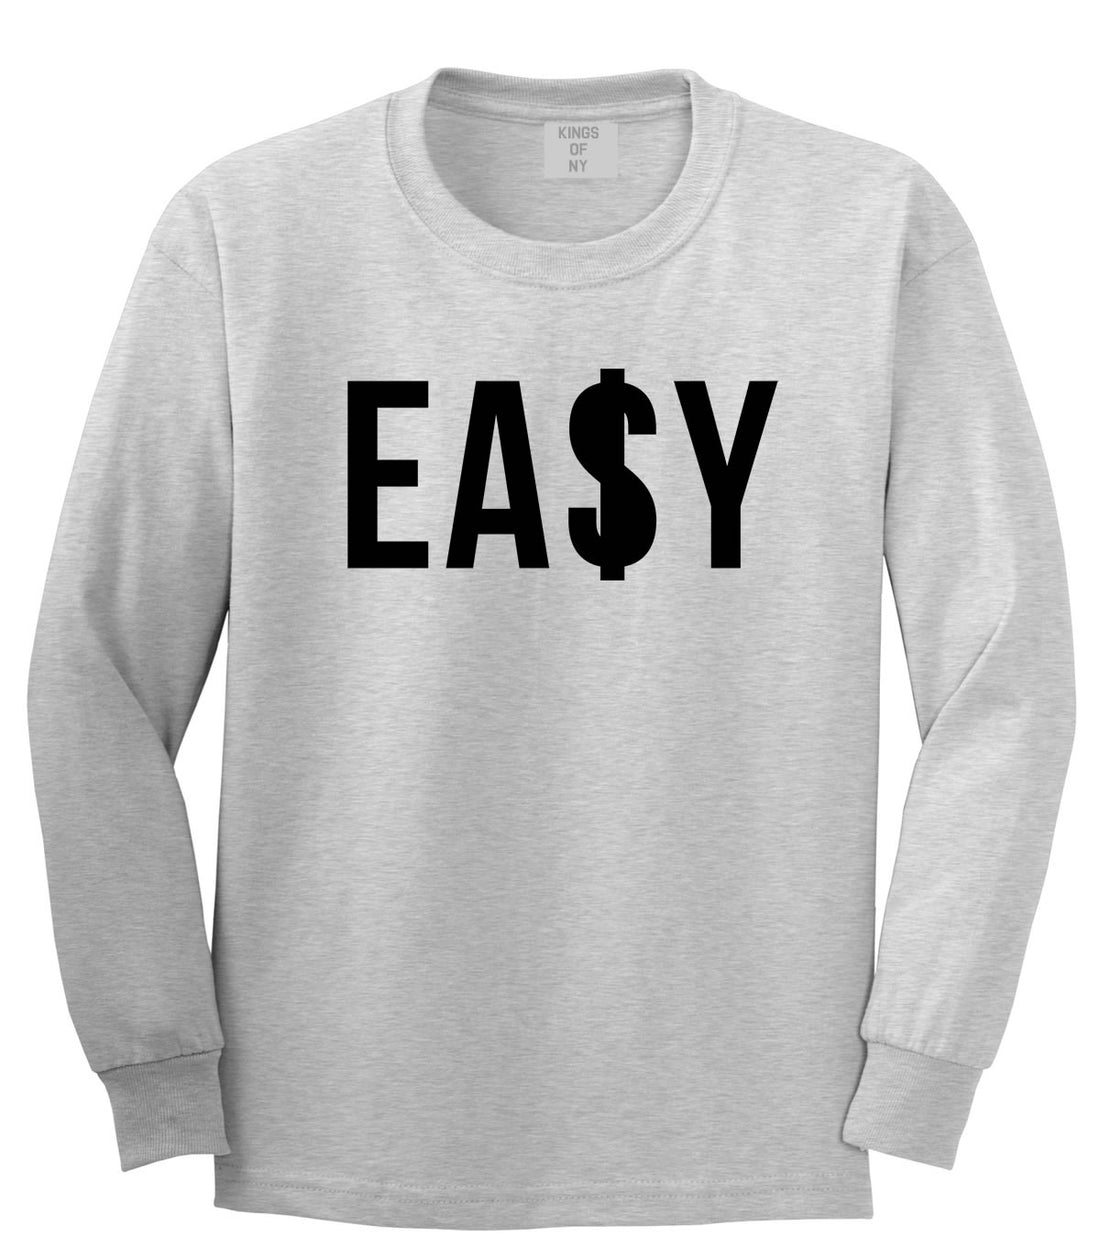 Easy Money Big High Dope Cool Black by Kings Of NY Long Sleeve T-Shirt In Grey by Kings Of NY